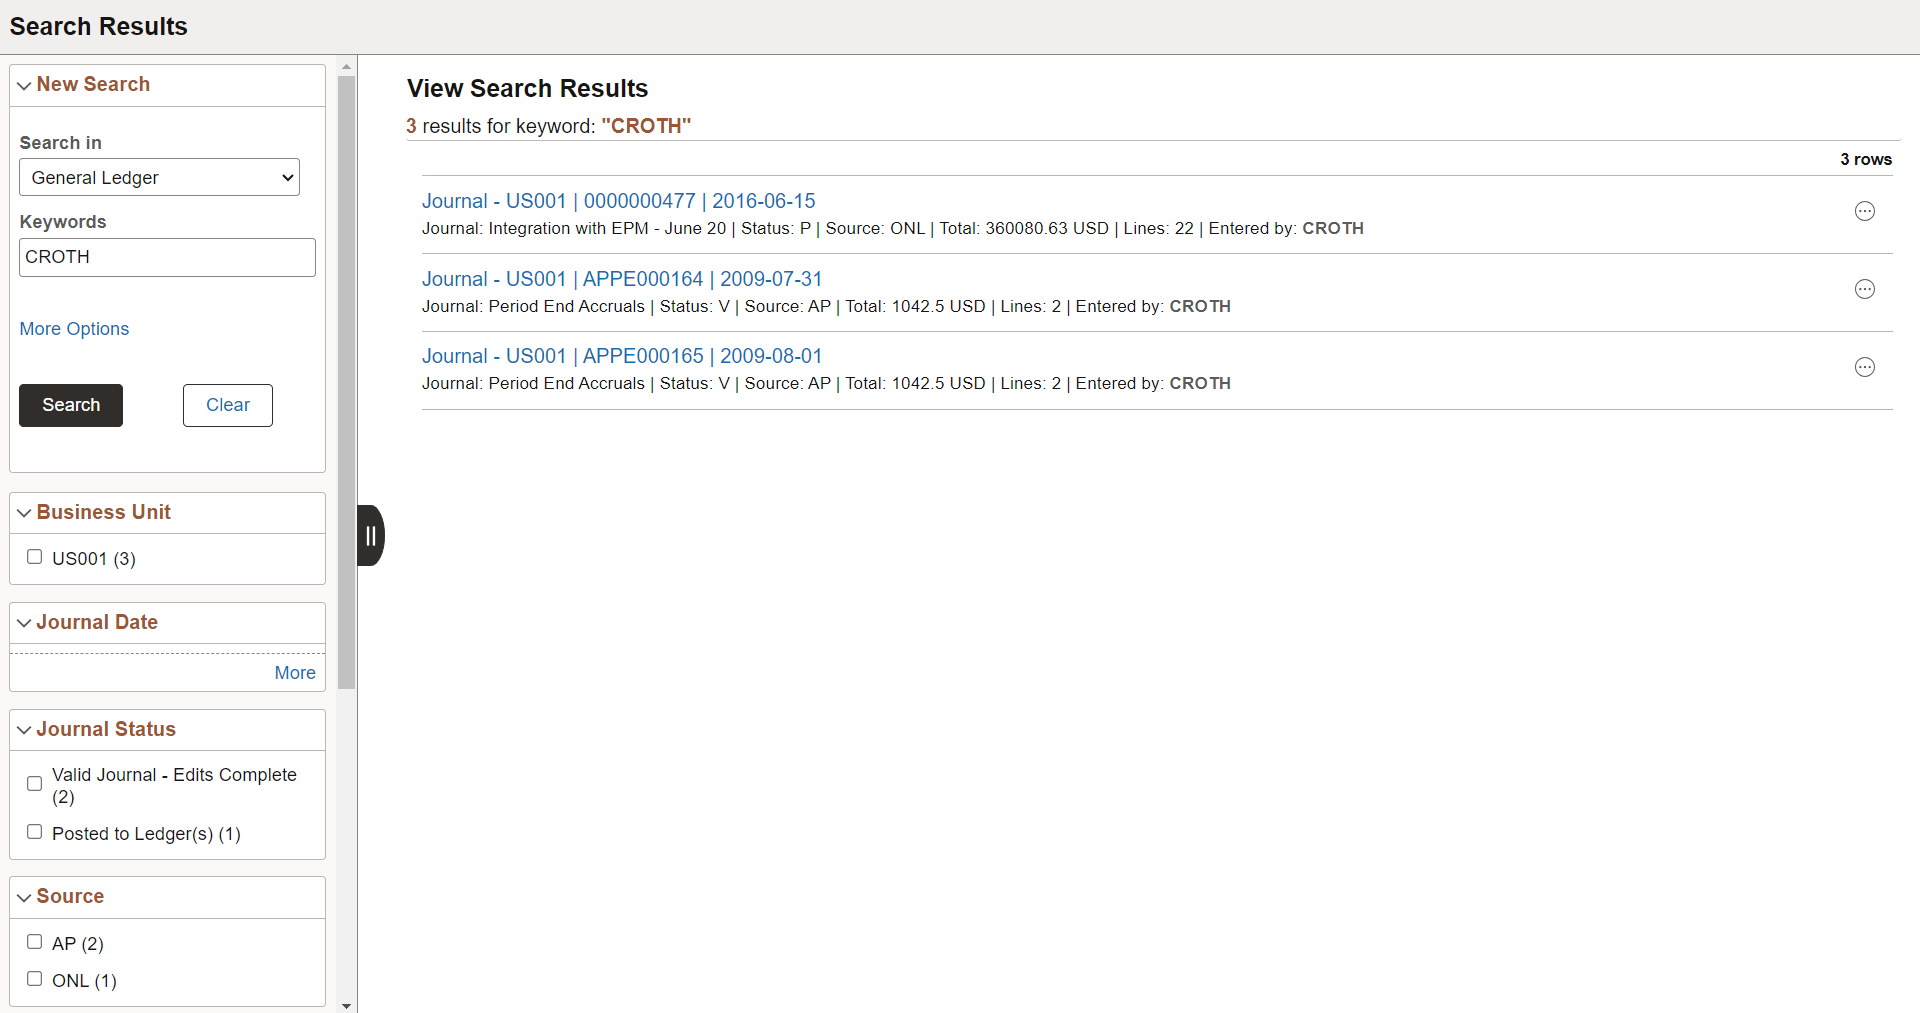 Global Search Results page